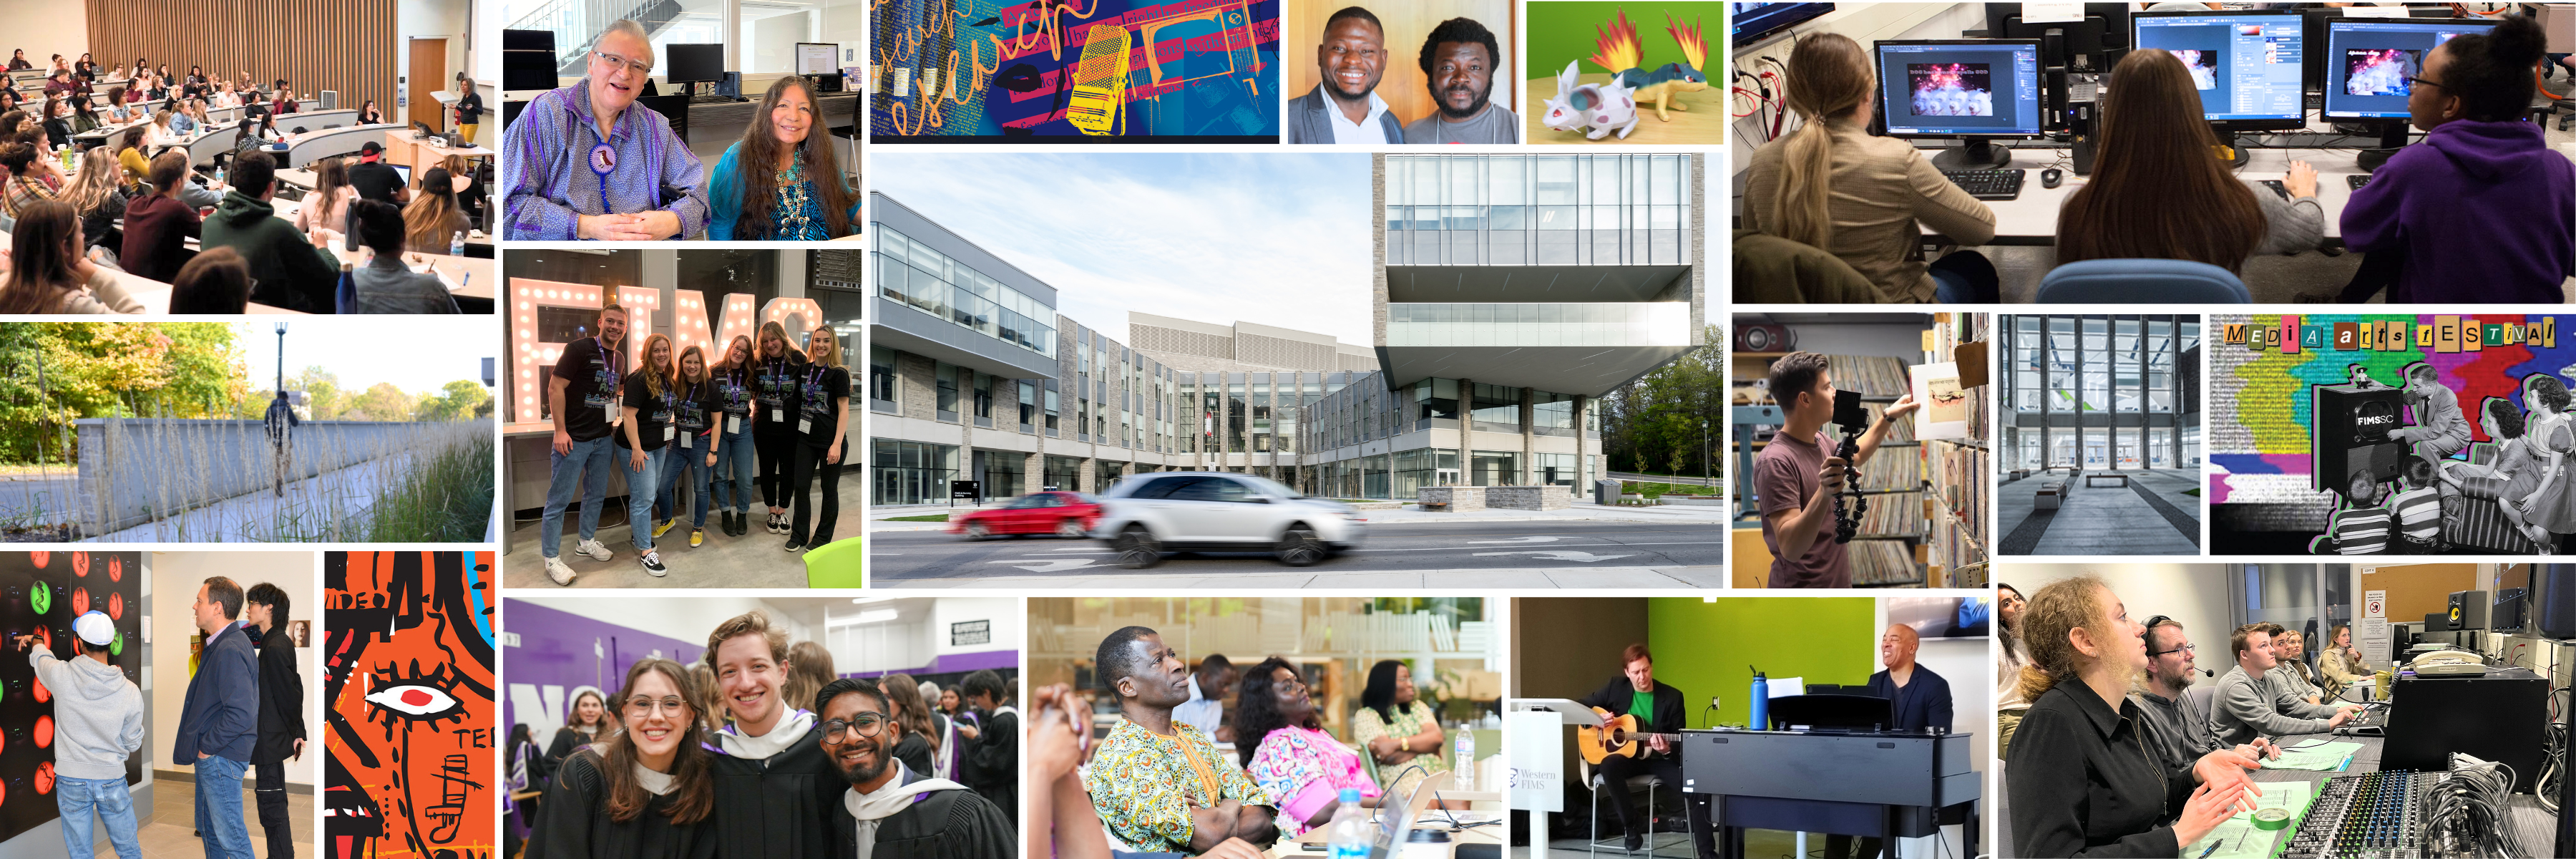 Montage of images showing FIMS students, faculty, staff and activities throughout the year.